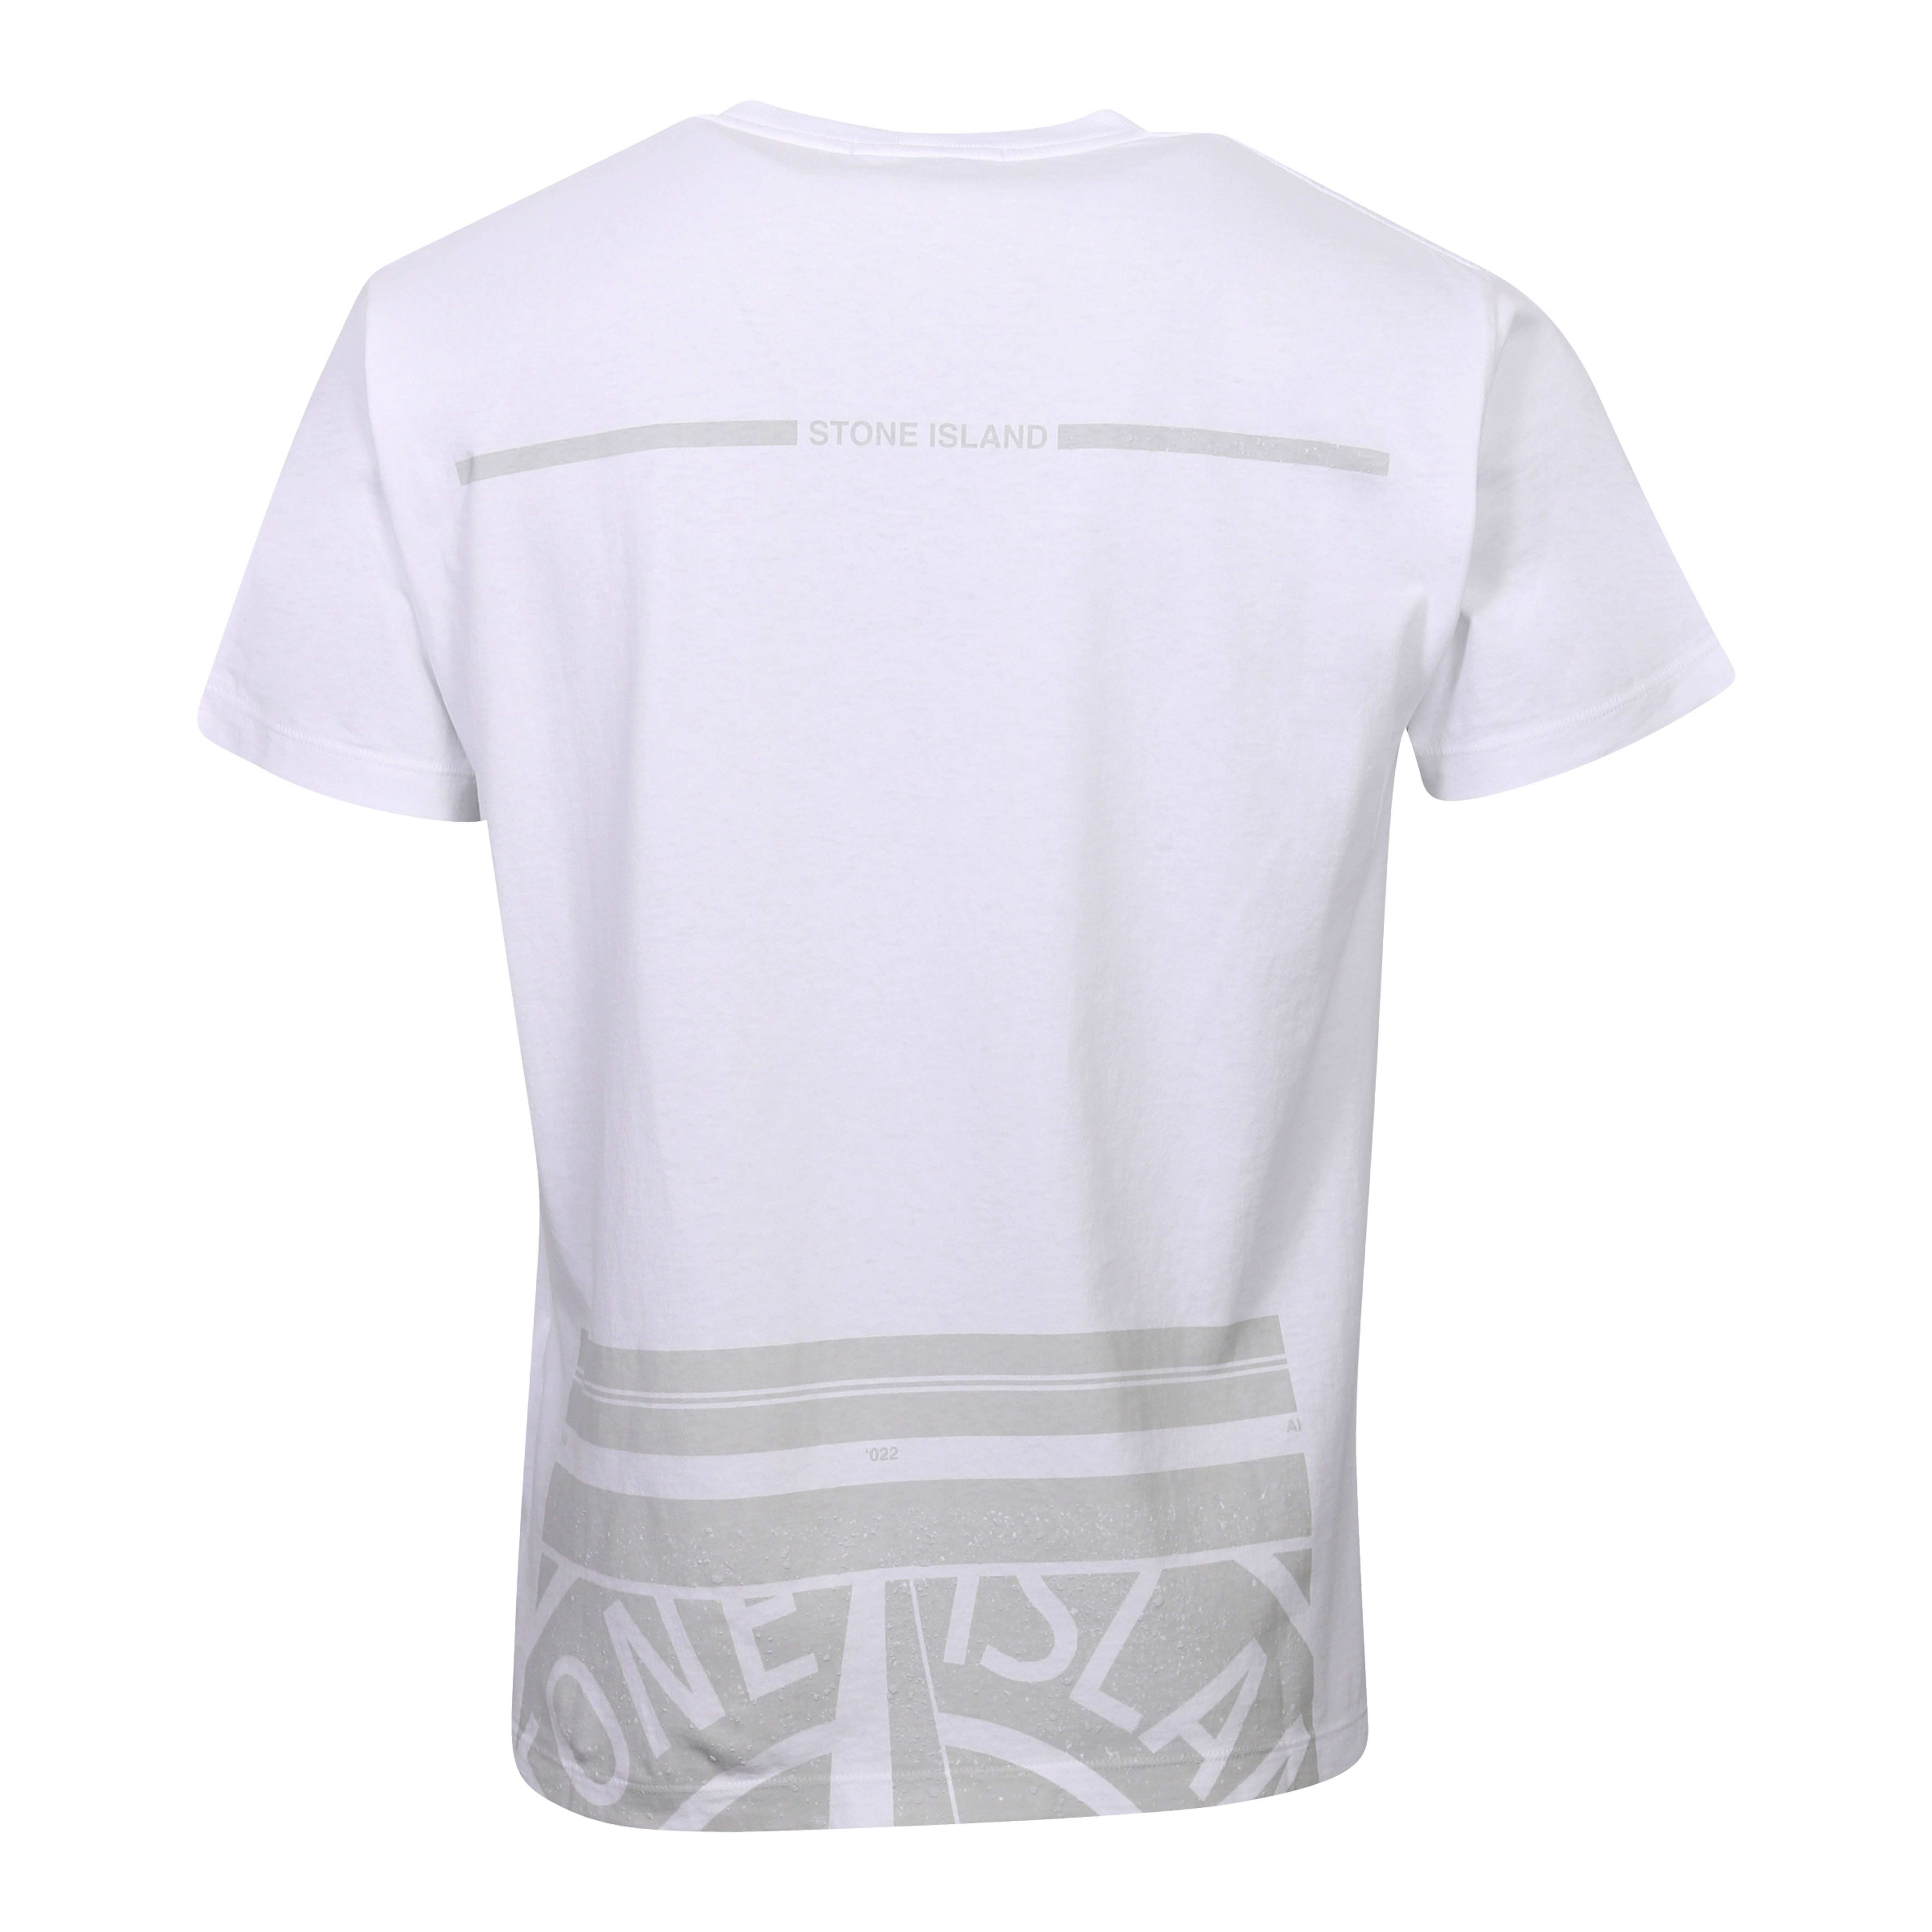 Stone Island Backprinted T-Shirt in White 3XL